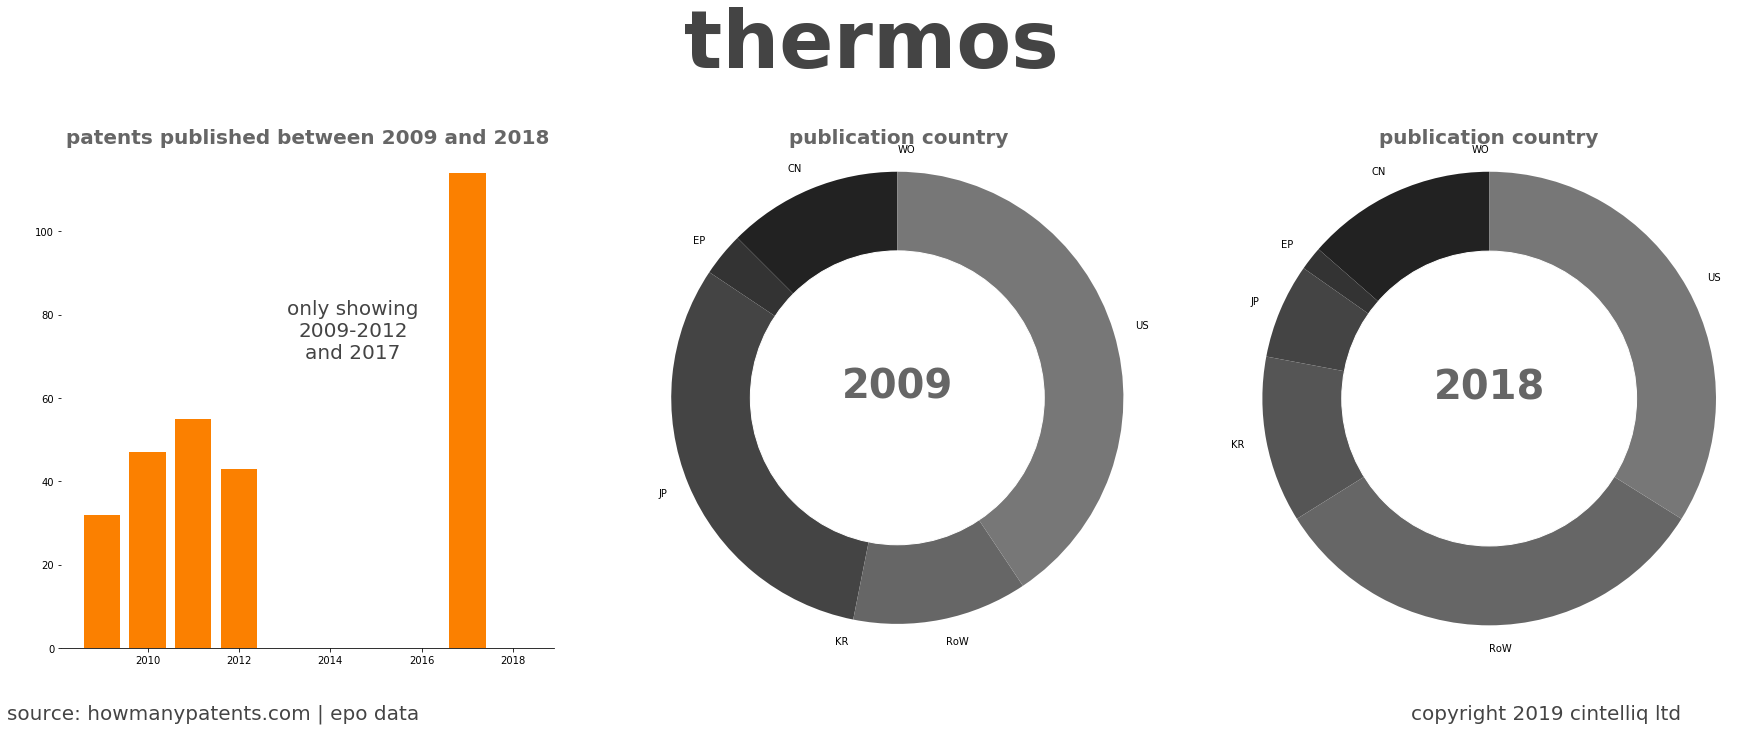 summary of patents for Thermos